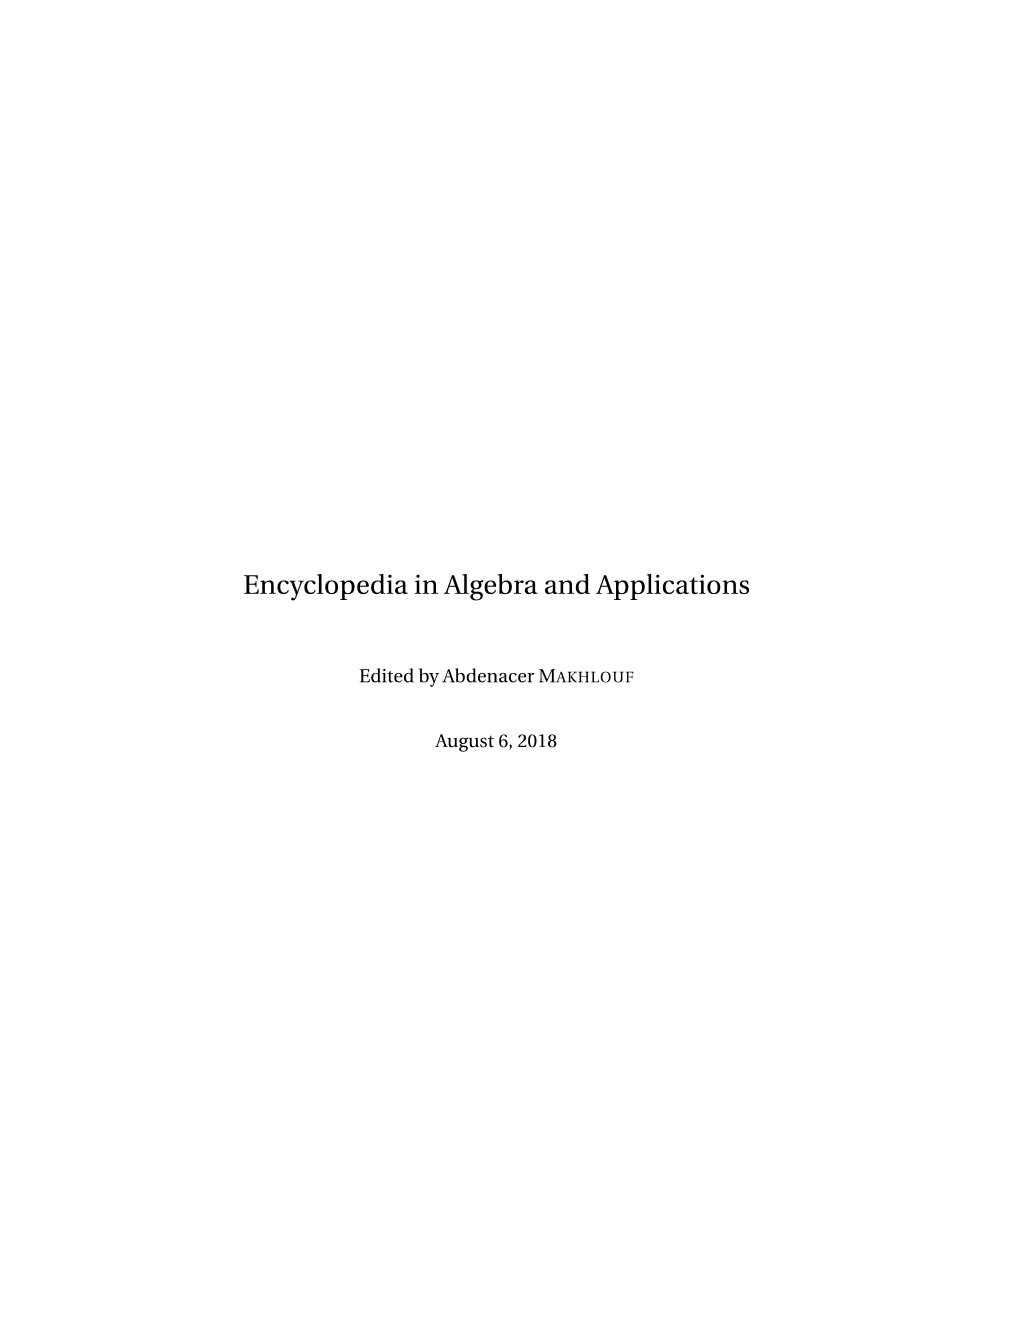 Encyclopedia in Algebra and Applications